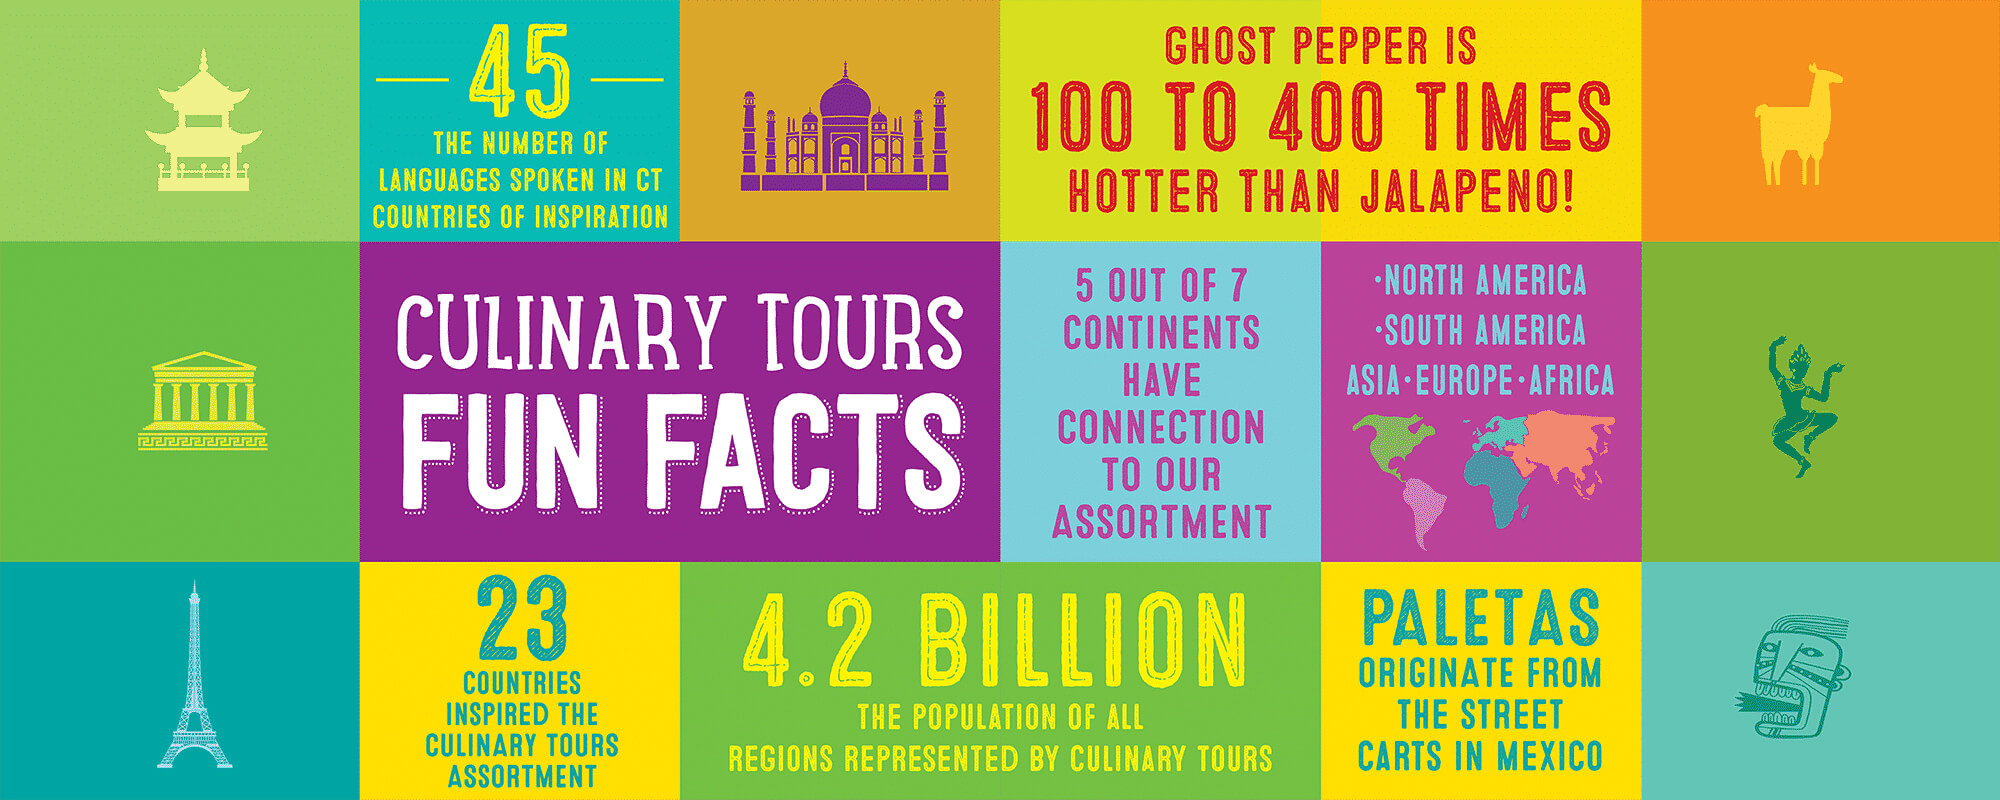 Culinary Tours Fun Facts